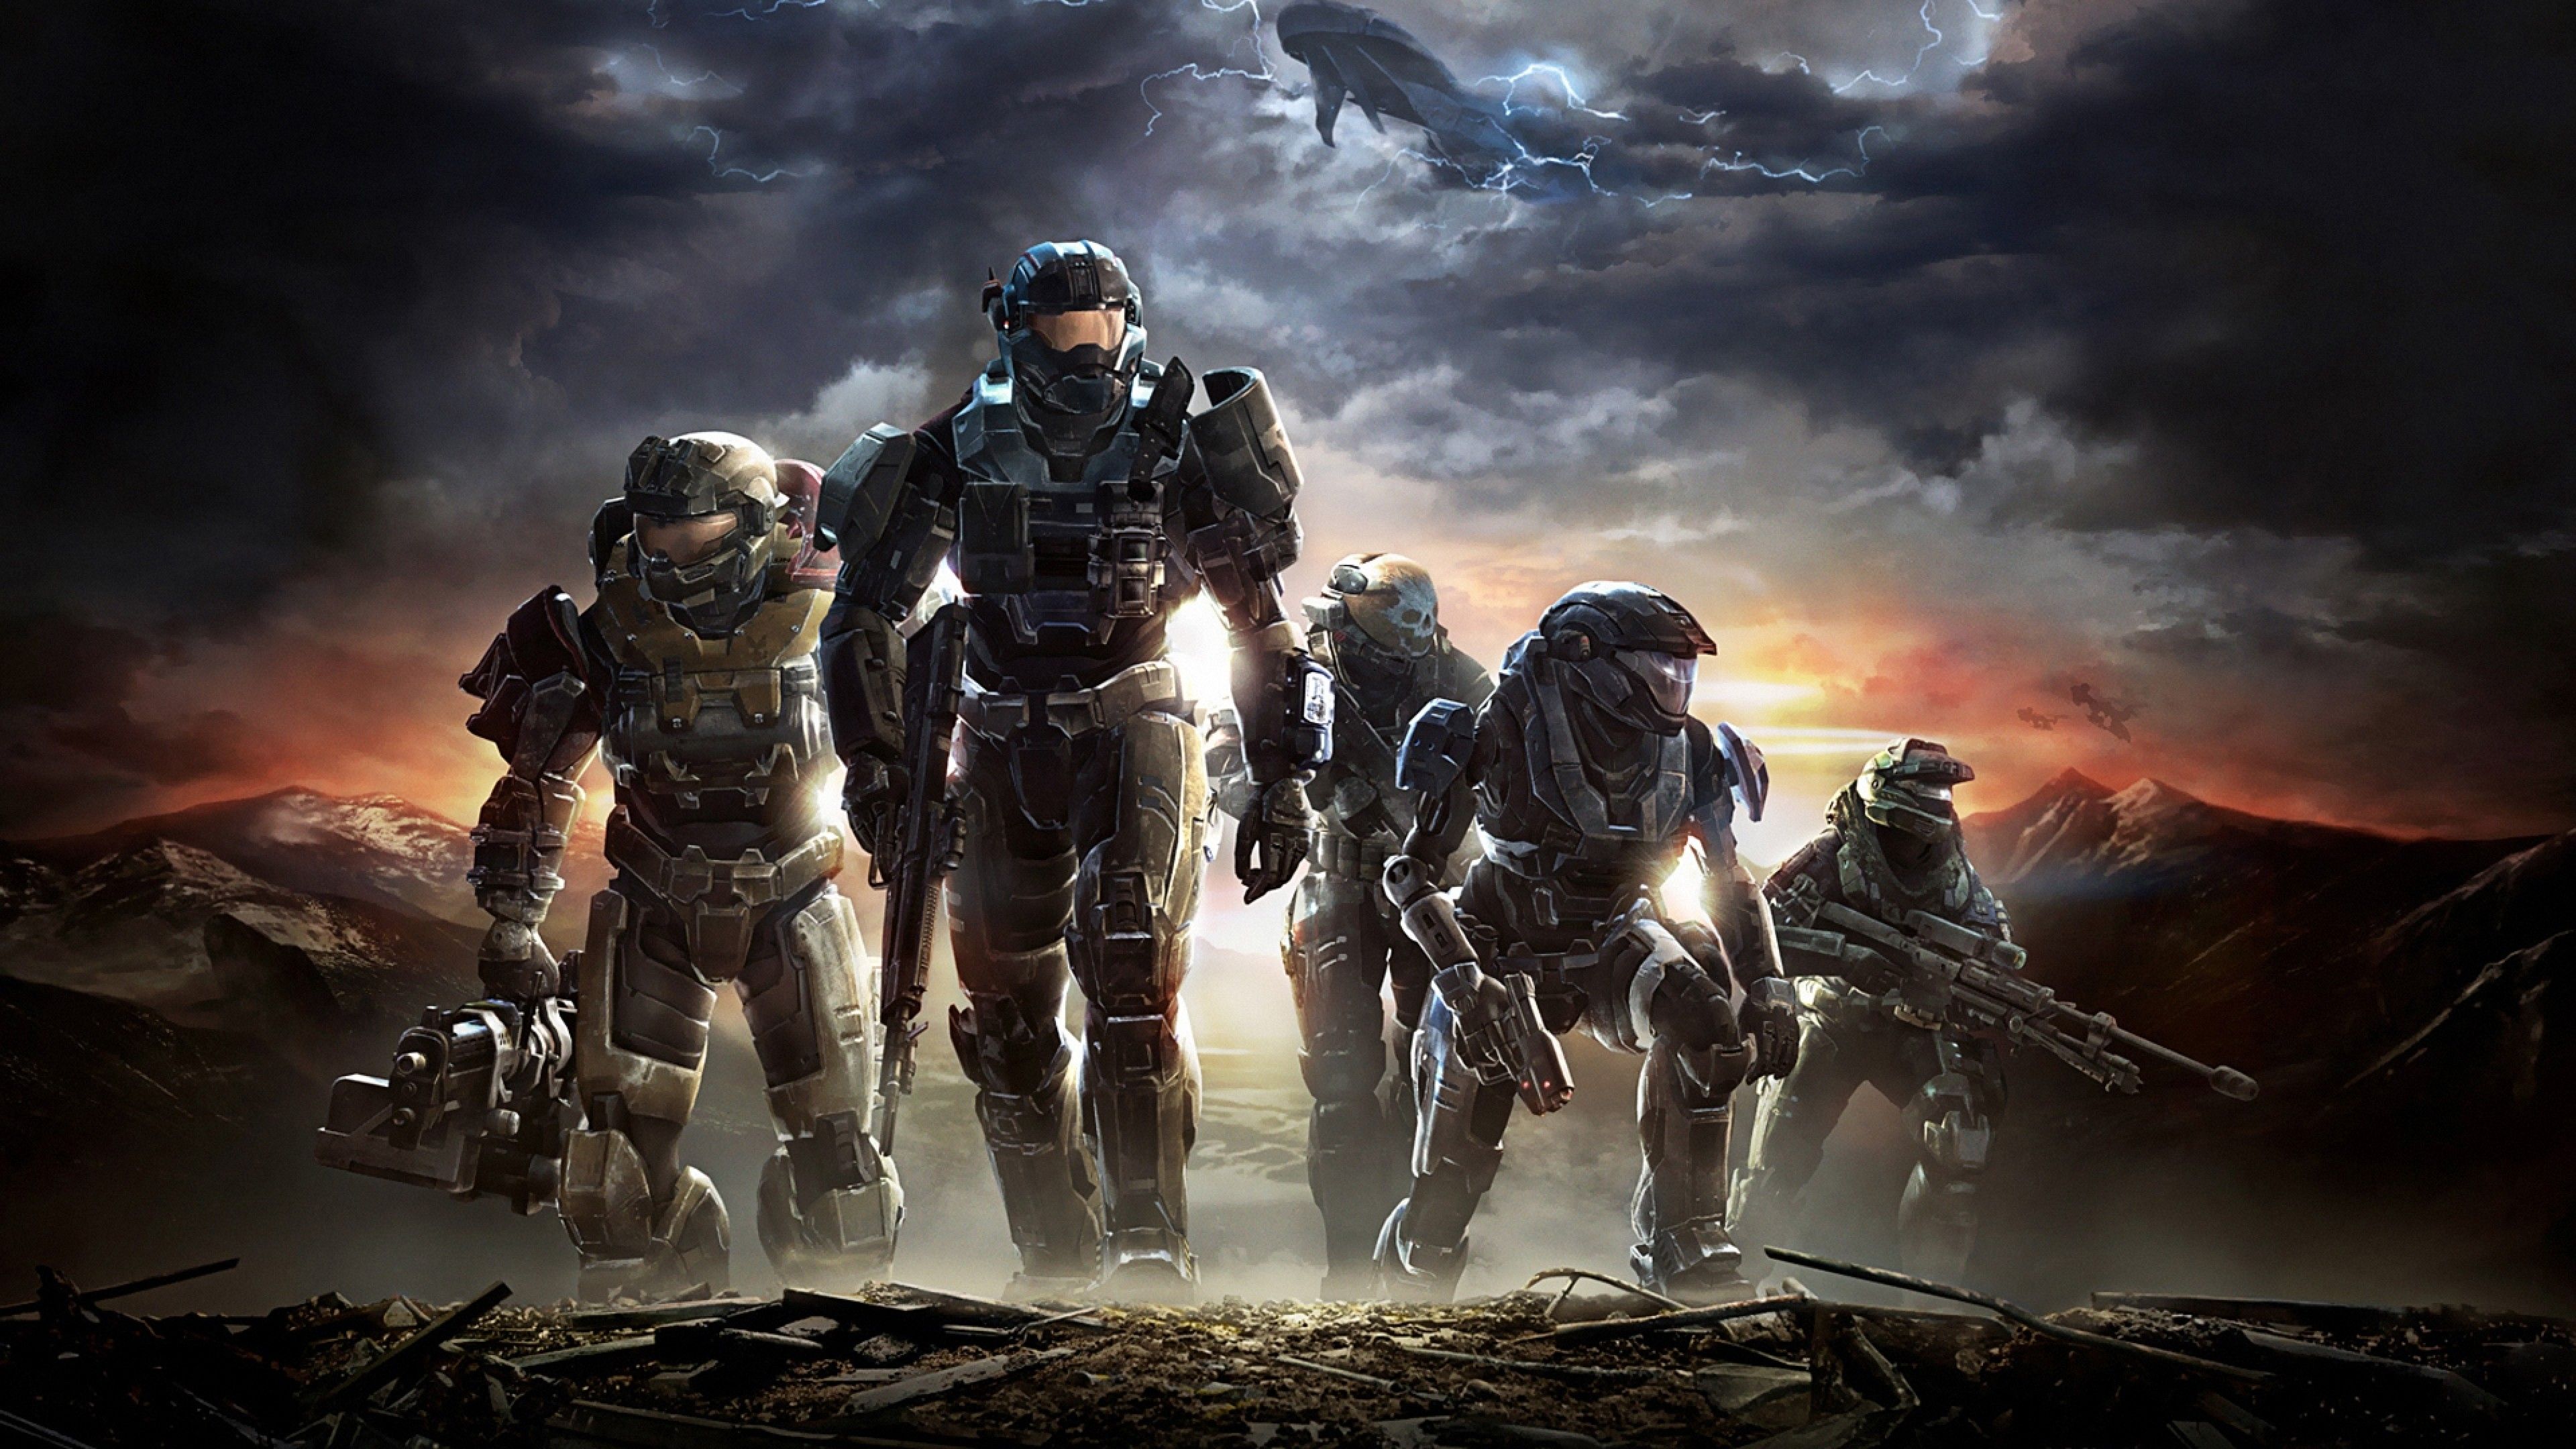 halo 2 backgrounds, halo 5 guardians wallpaper